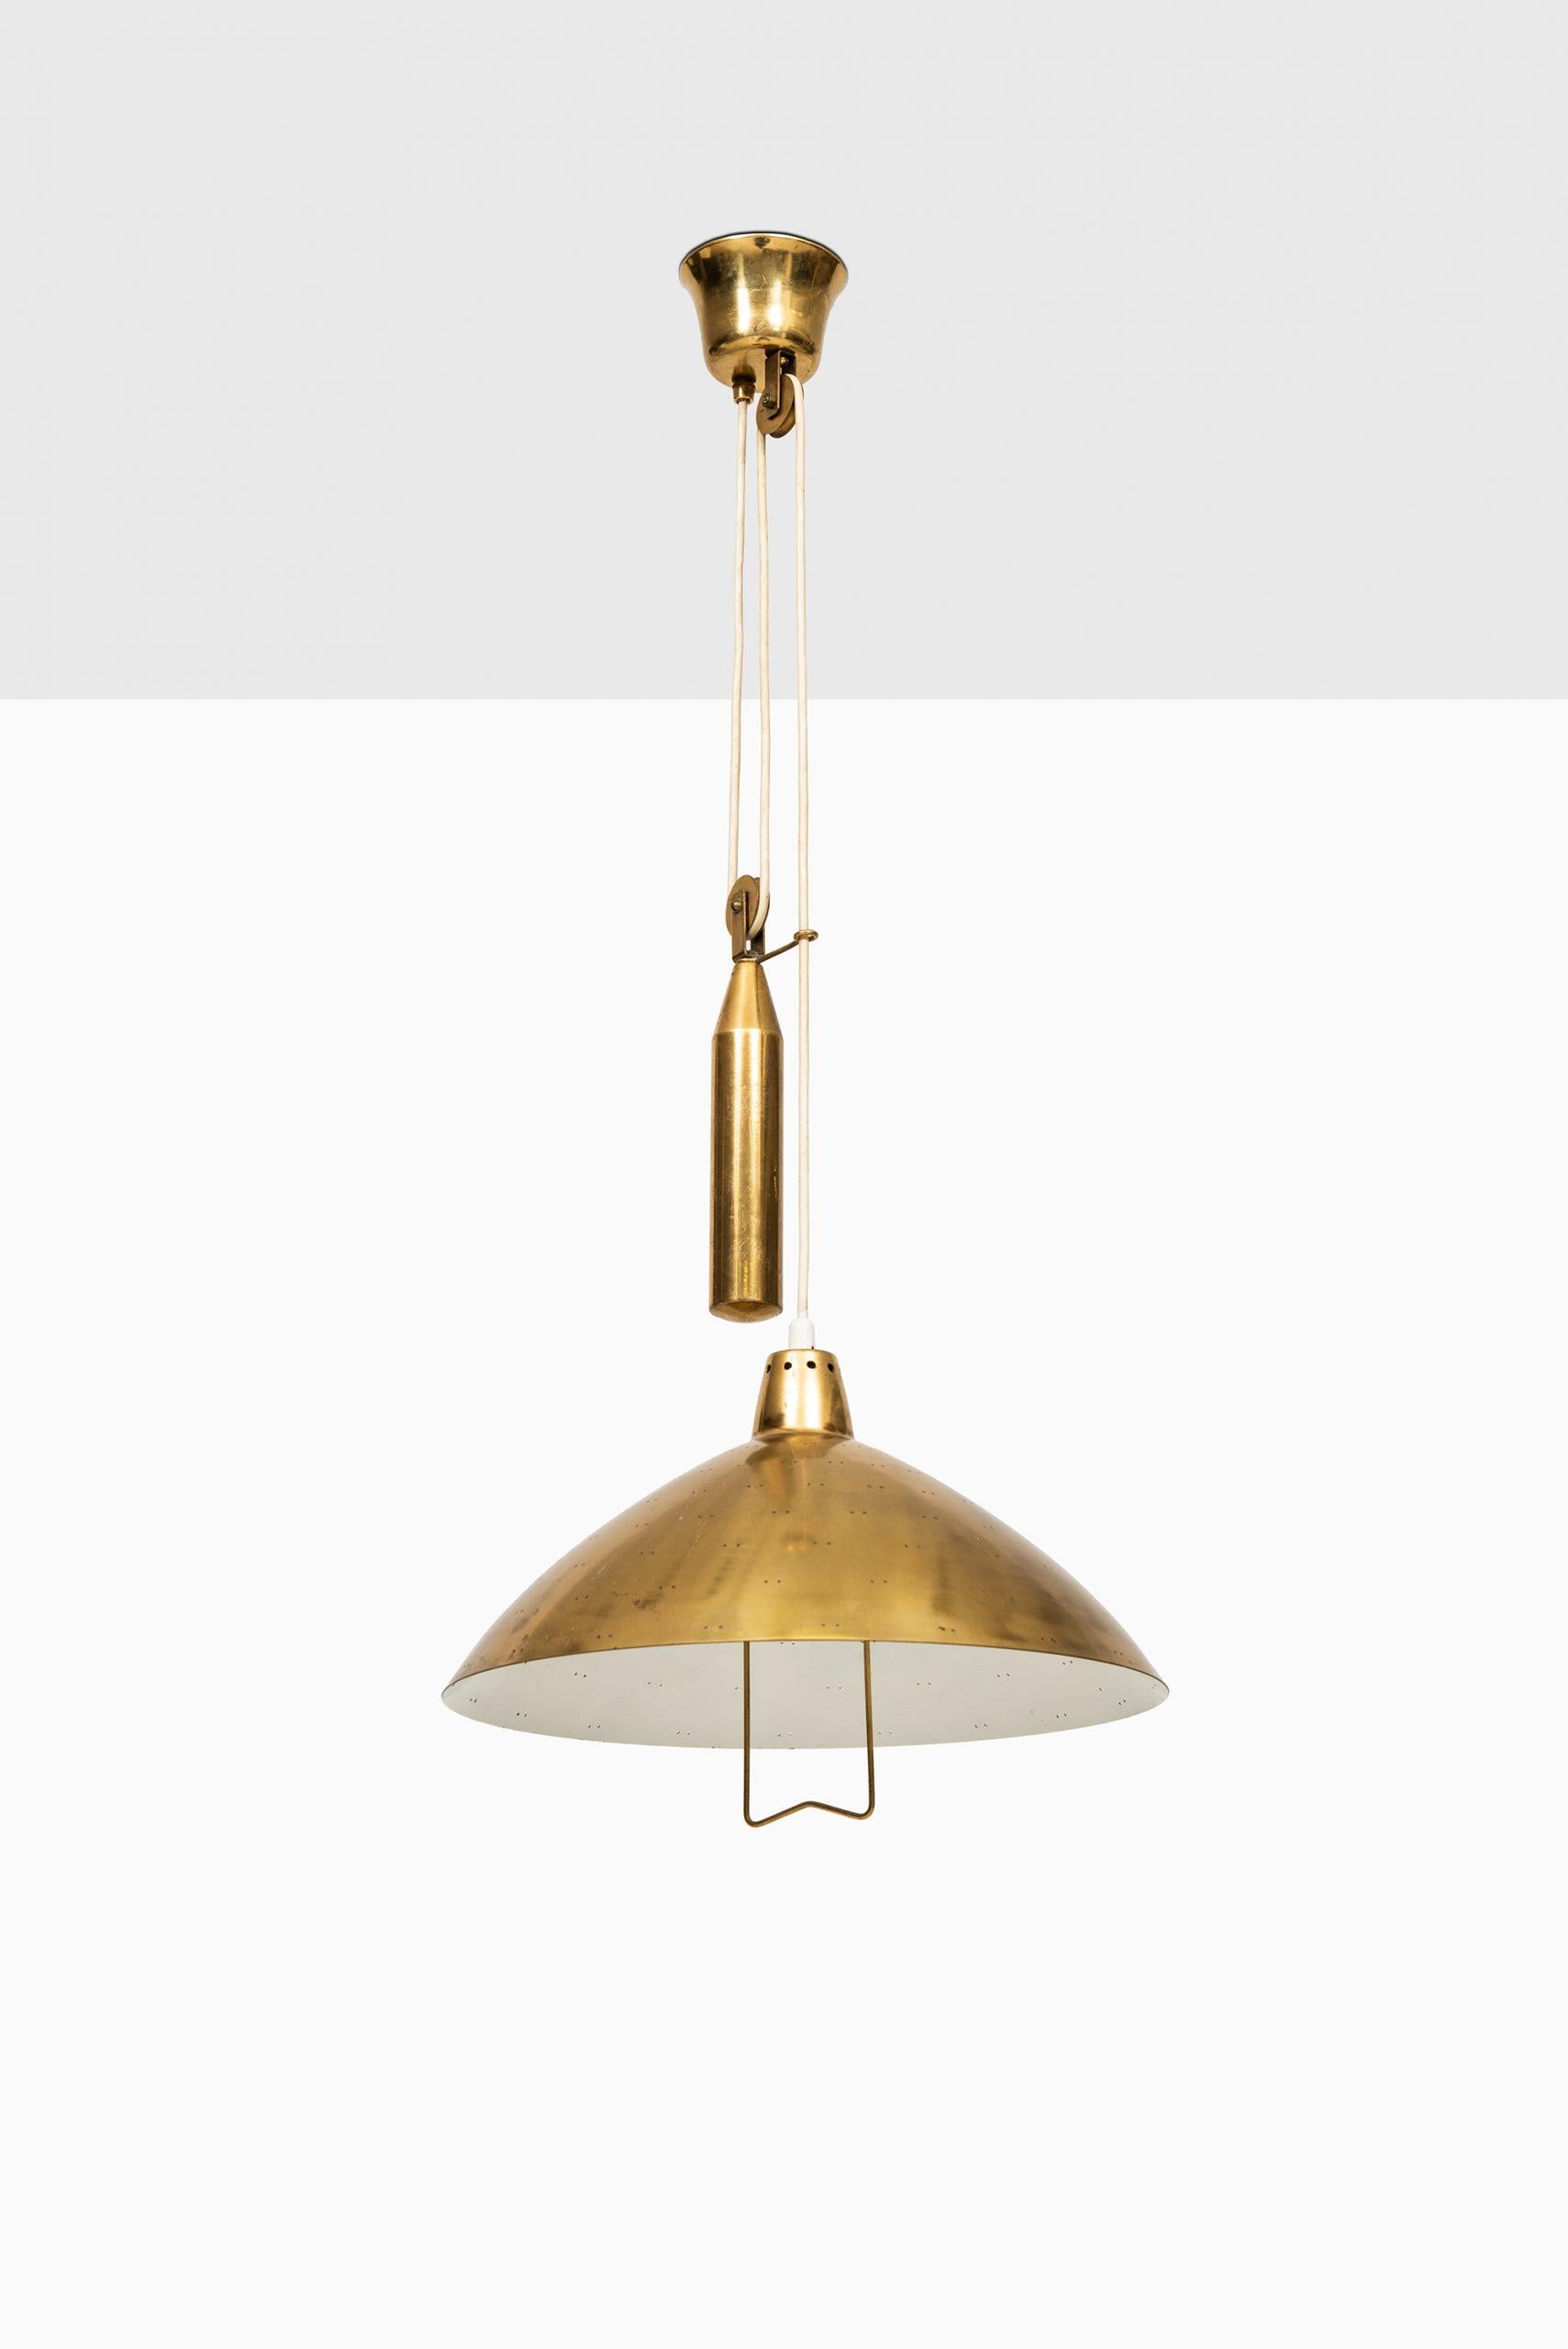 Rare counter weight ceiling lamp in the style of Paavo Tynell. Produced by Itsu in Finland. Measure: Height: 100-165 cm.